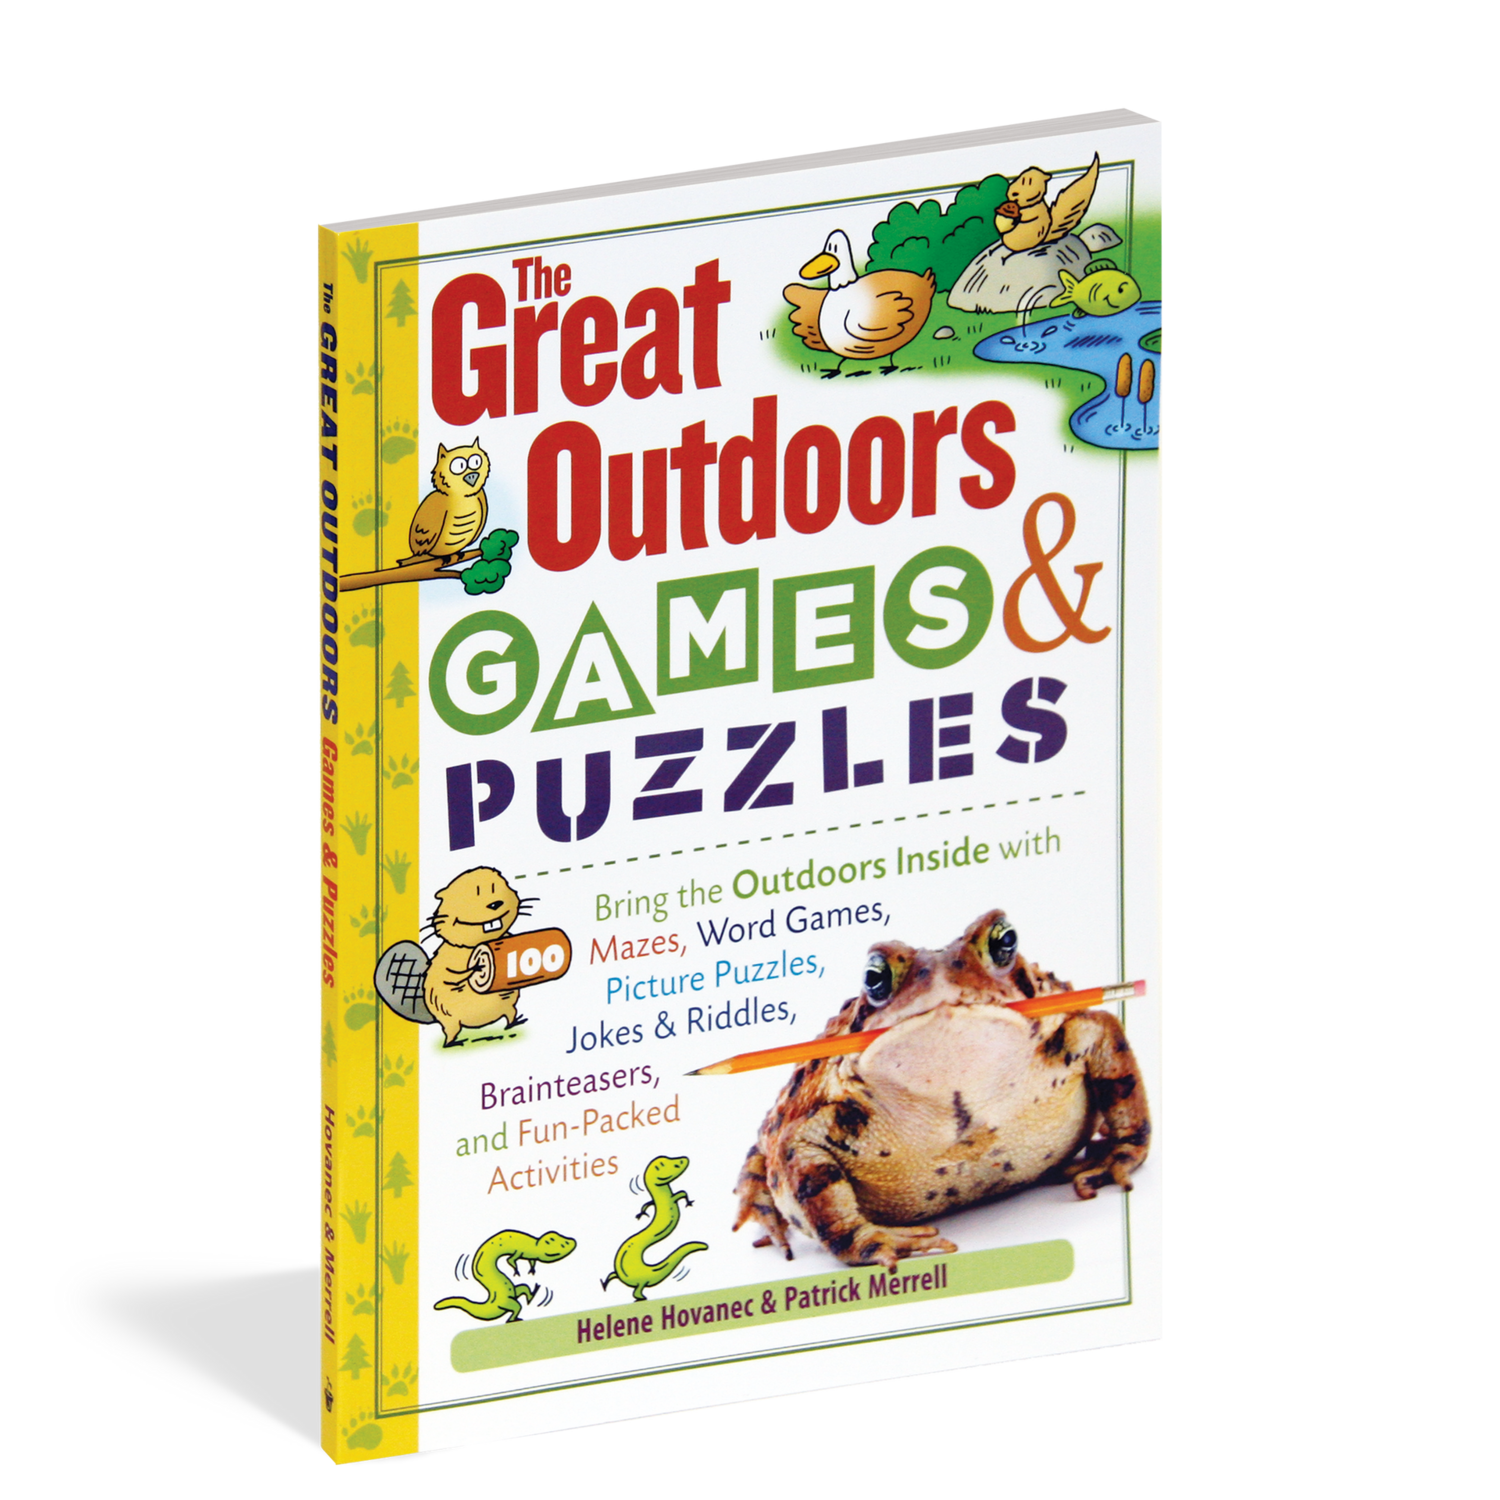 The Great Outdoors Games &amp; Puzzles Activity Book